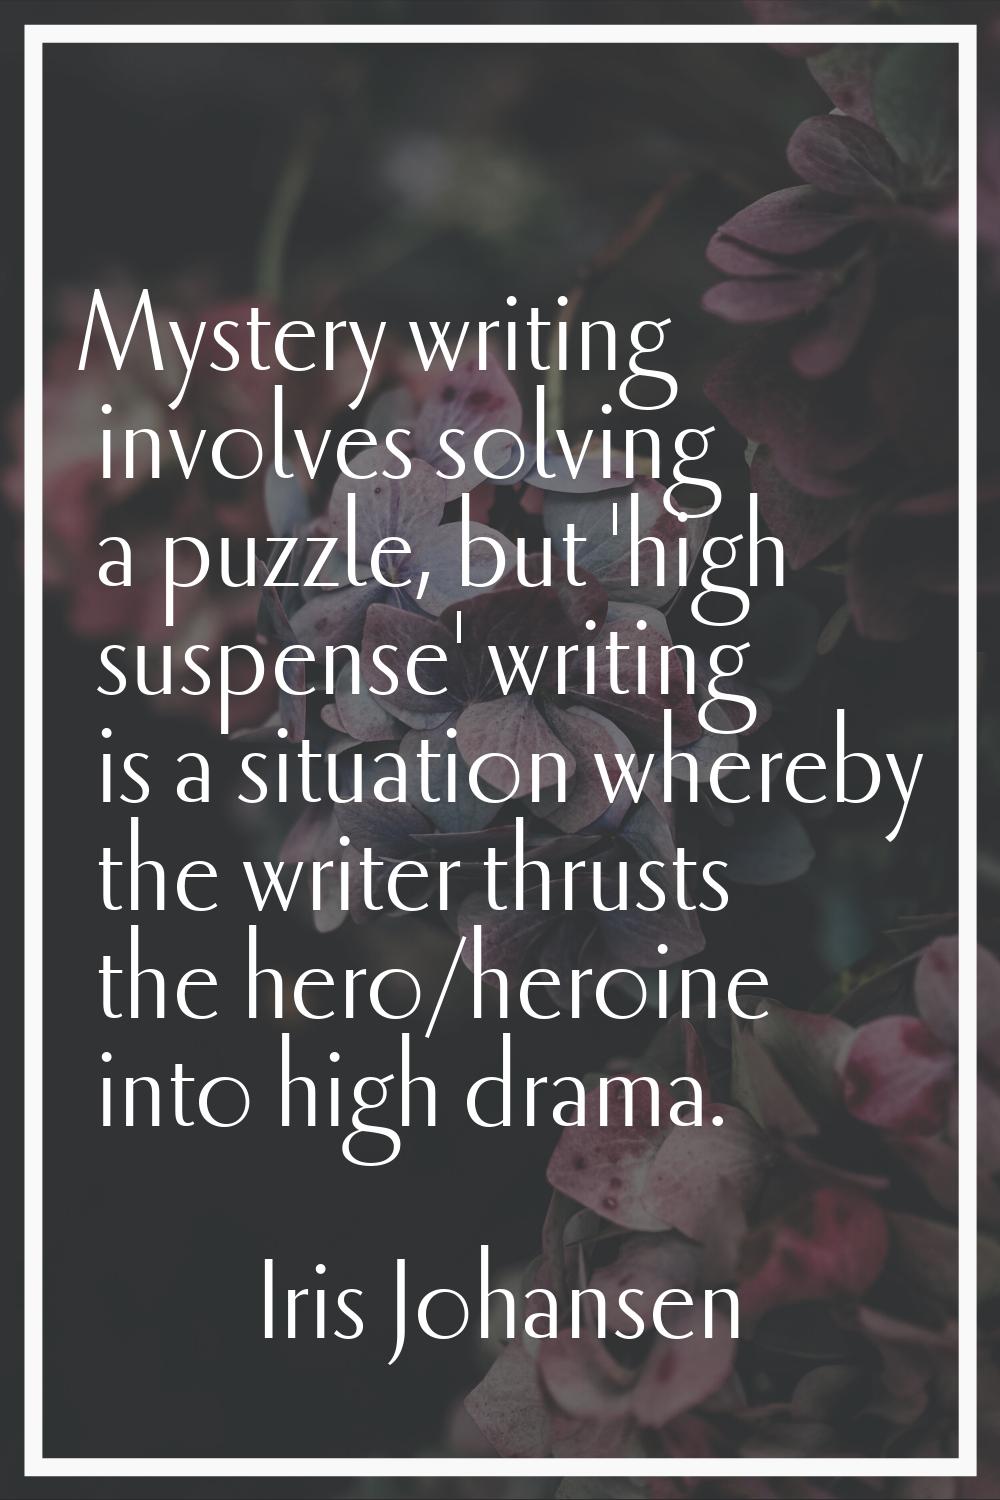 Mystery writing involves solving a puzzle, but 'high suspense' writing is a situation whereby the w